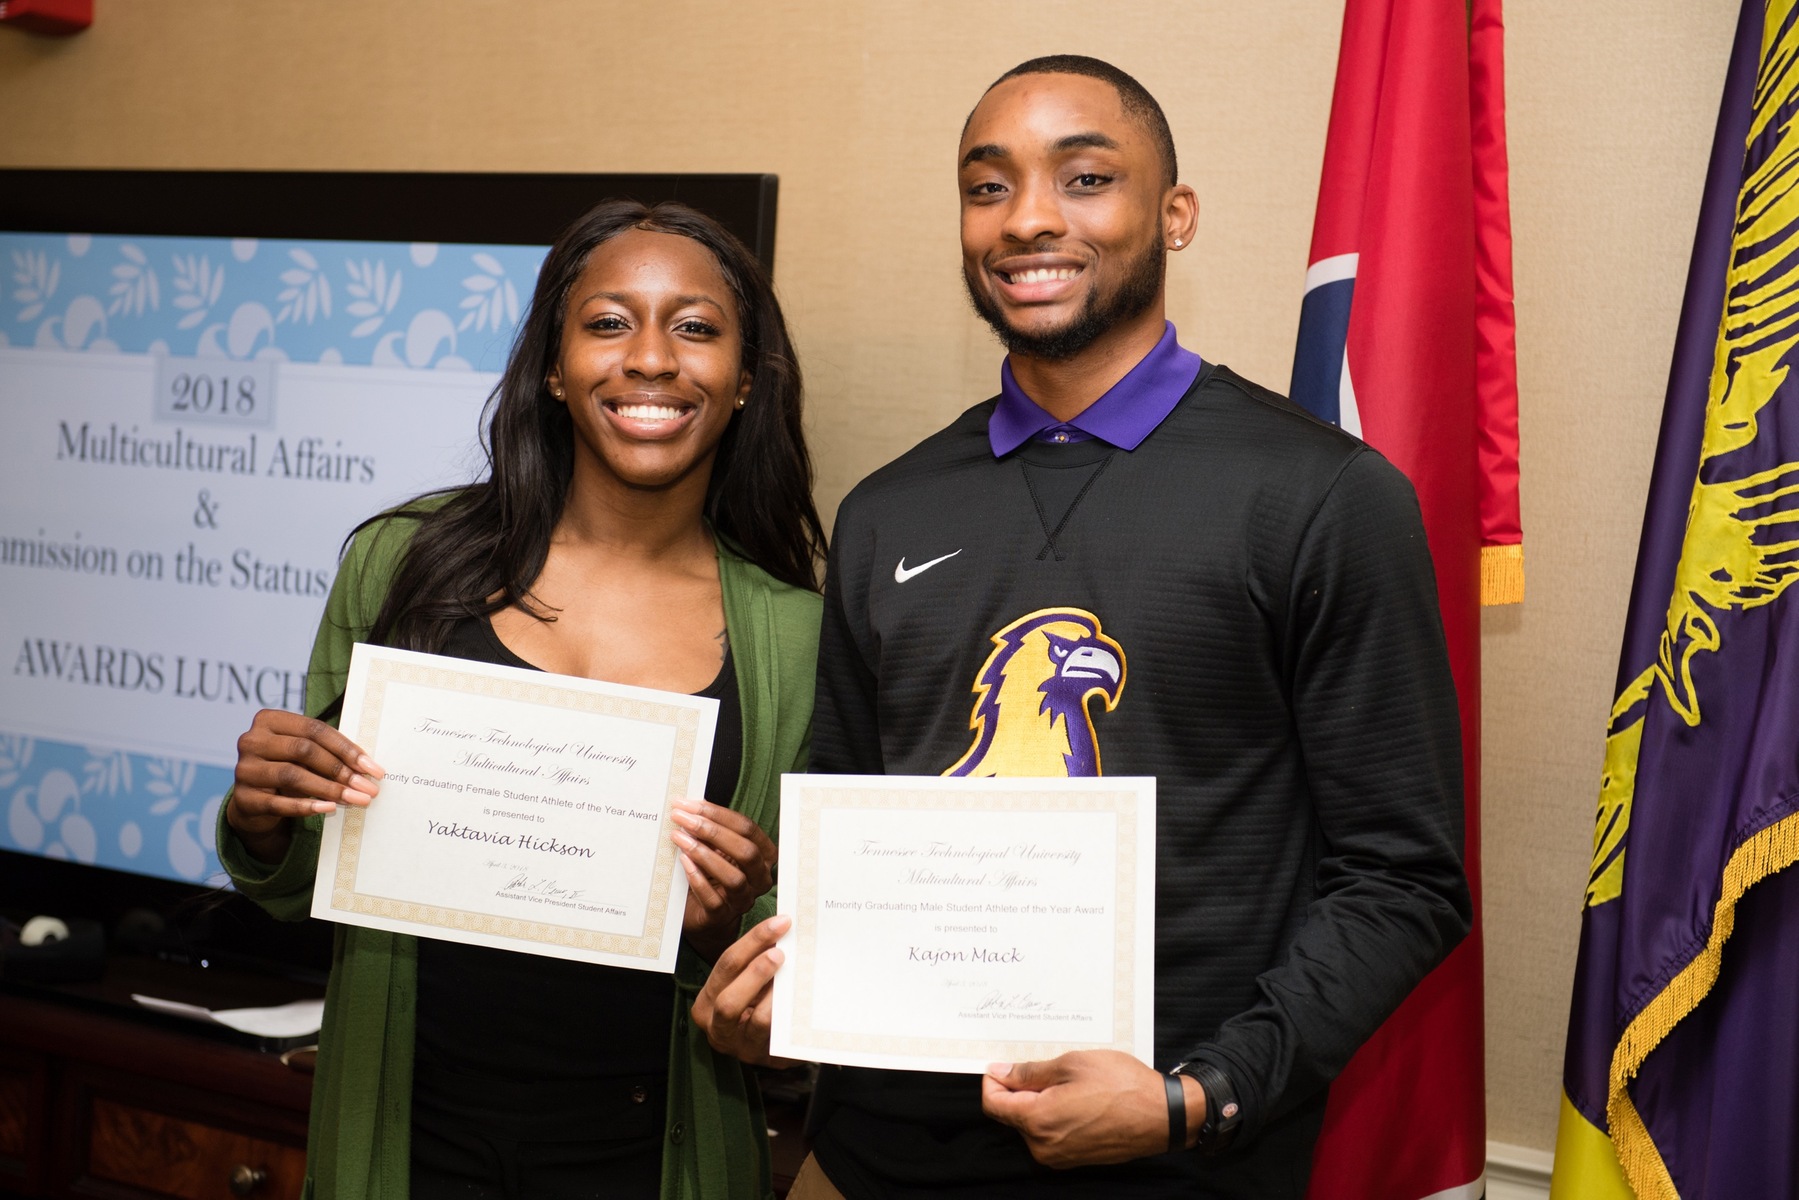 Mack, Hickson named Minority Student-Athletes of the Year by university